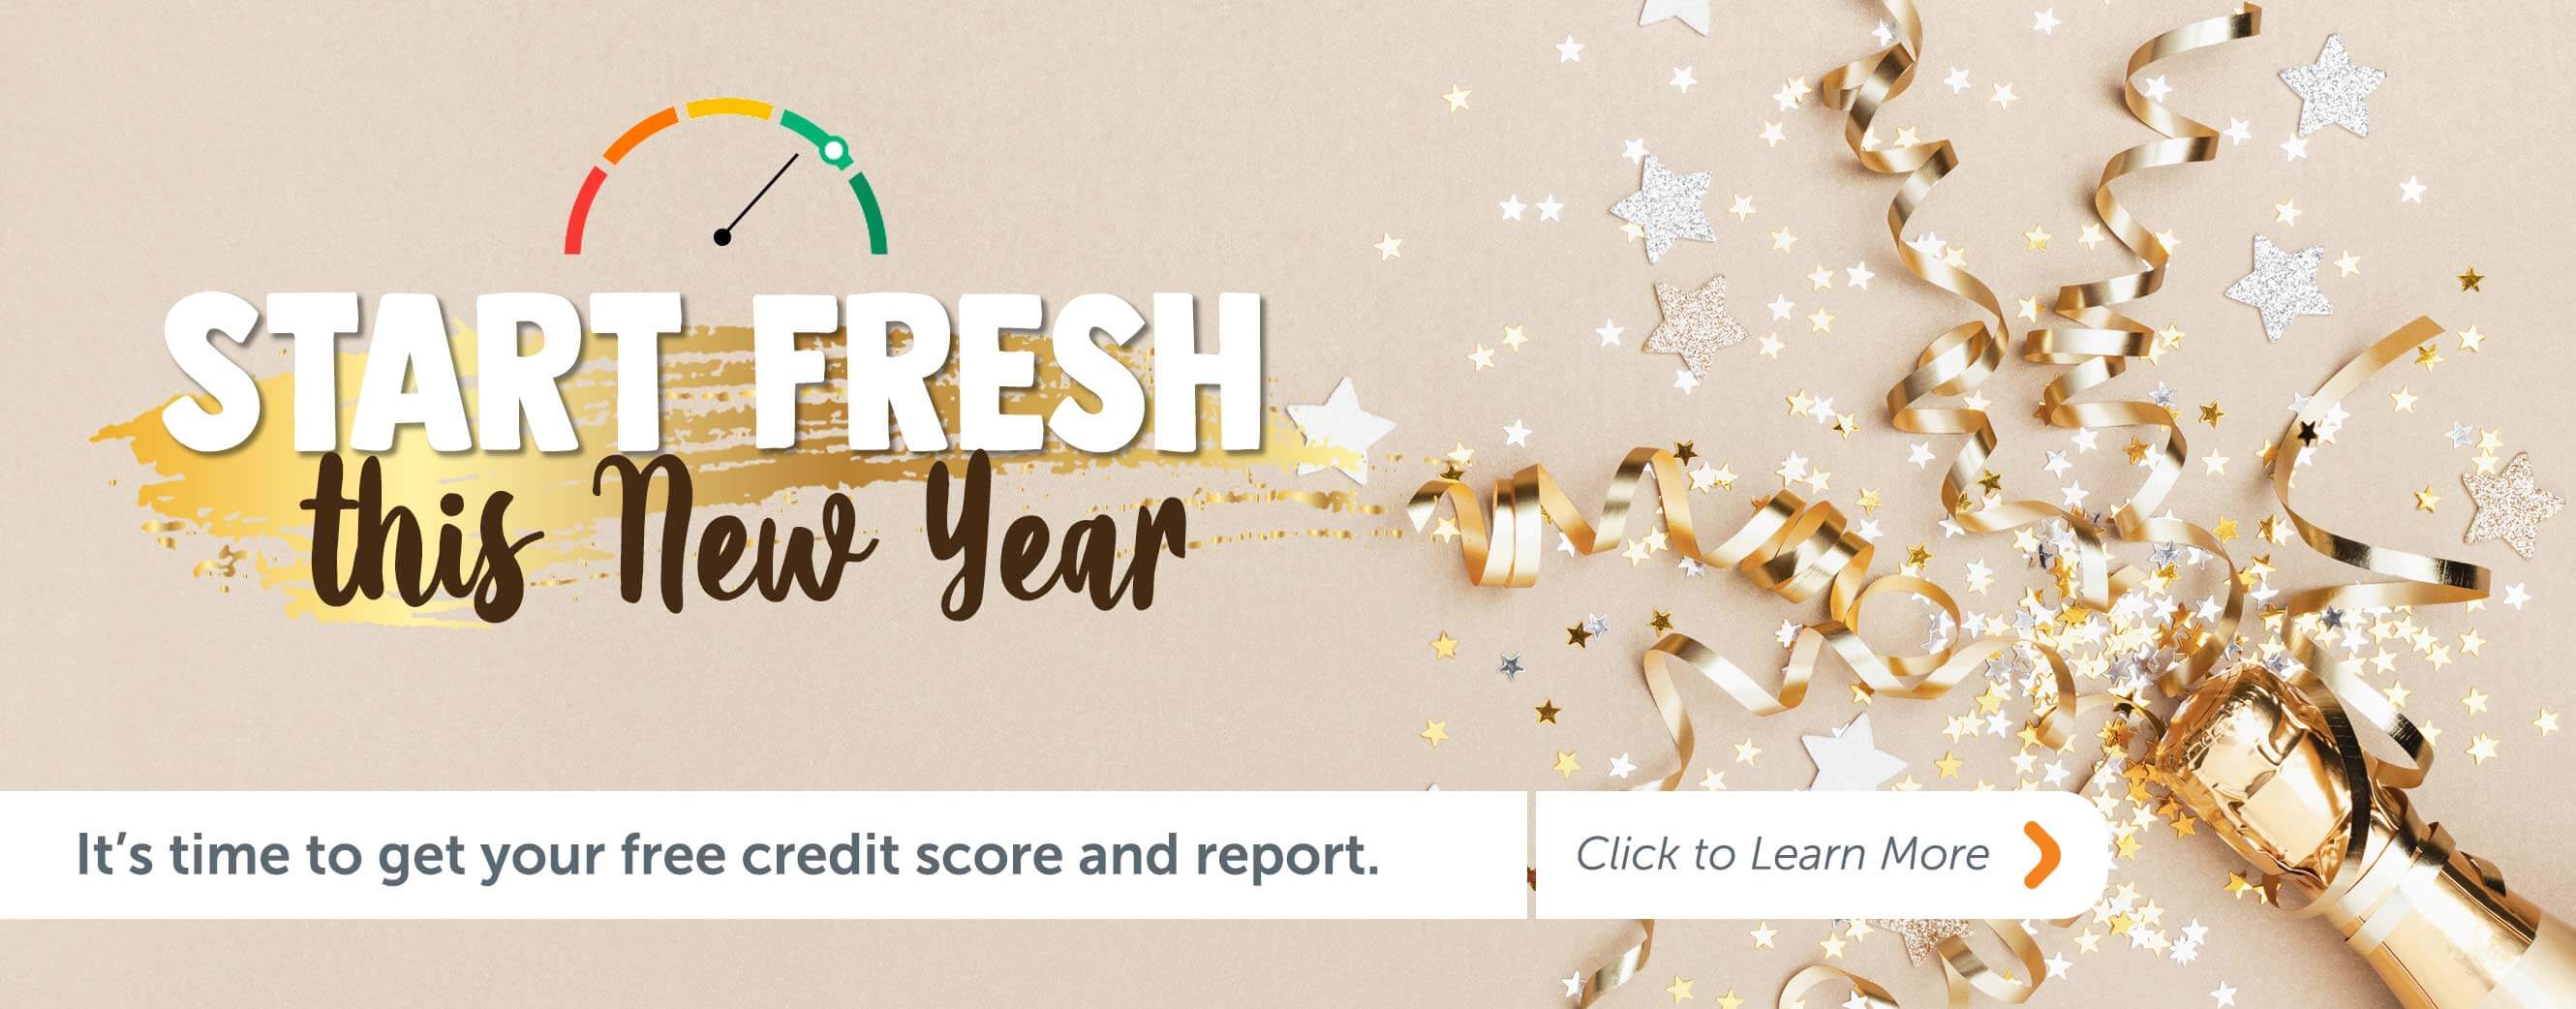 Start Fresh this New Year. It's time to get your free credit score and report. Click to learn more.